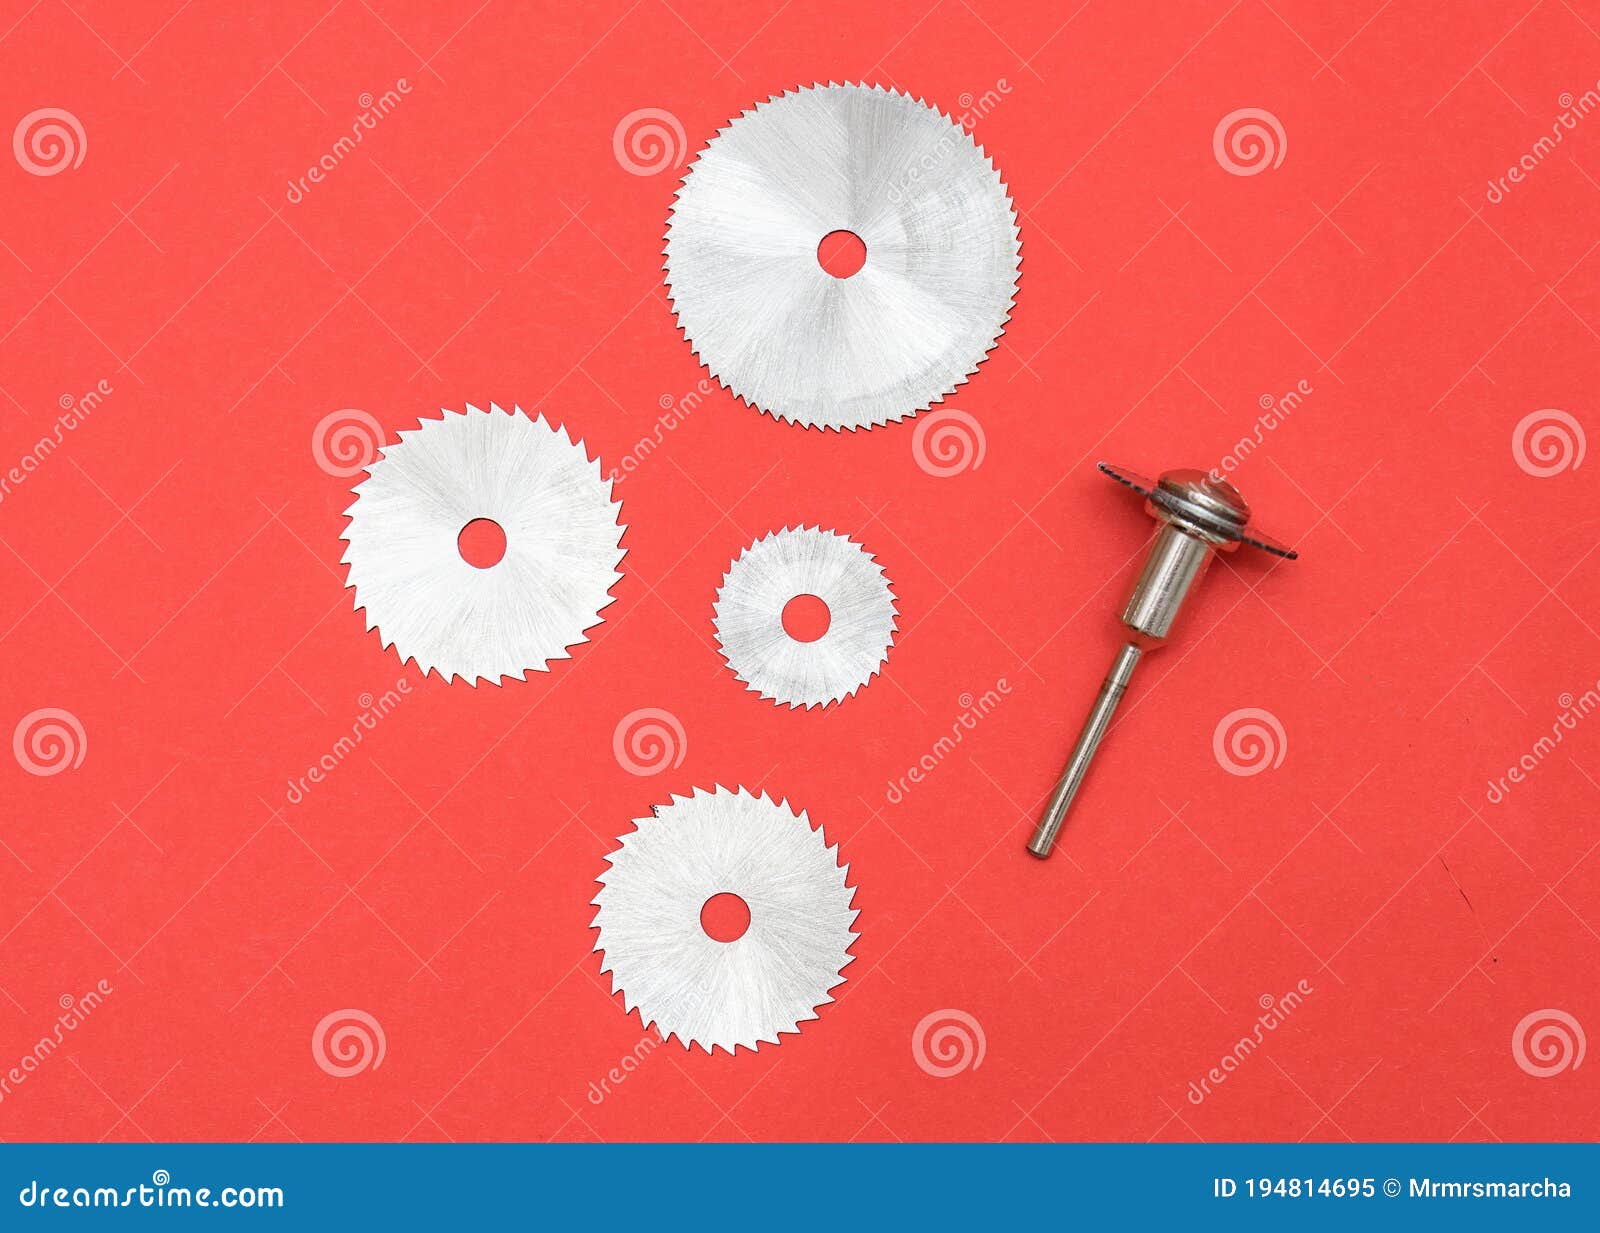 Cutting Blades for Professional Engraving Machine Isolated on Red Color. Dremel  Attachments Stock Image - Image of industry, accessory: 194814695